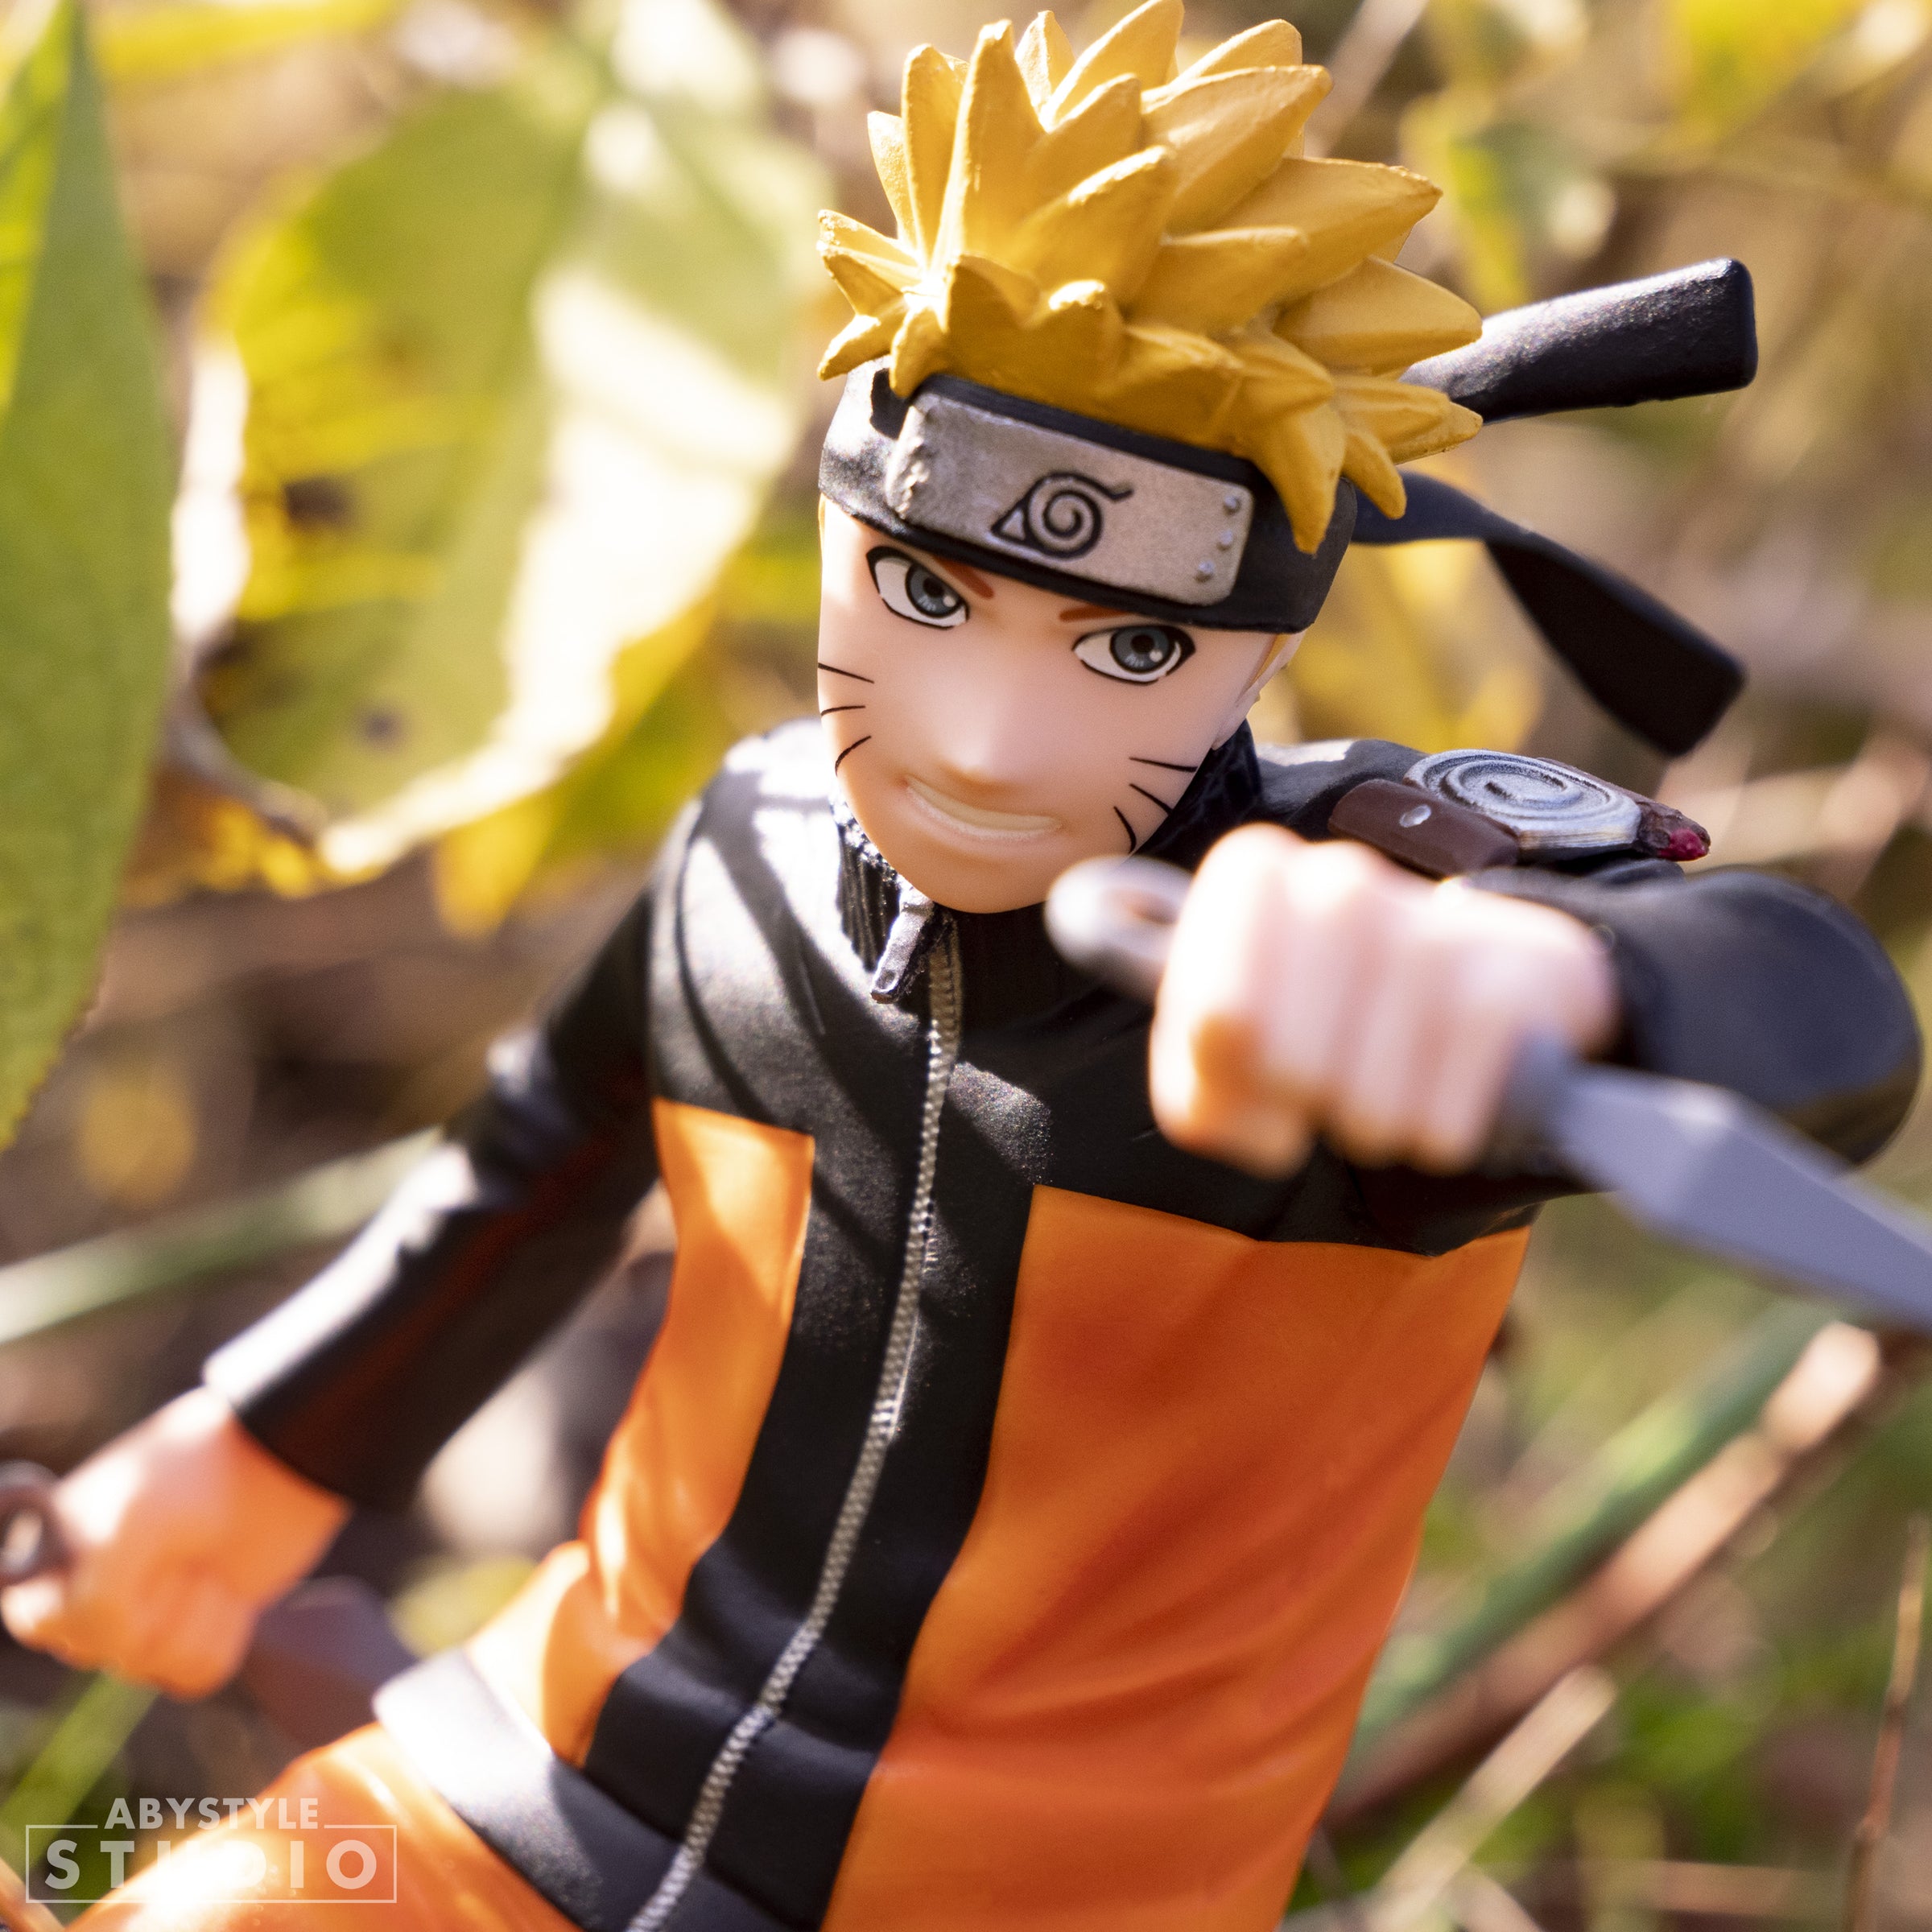 ABYstyle Studio Naruto Shippuden Sasuke Uchiha SFC Collectible PVC Figure  6.7 Tall Anime Manga Statue Home Room Office Decor Great for Gift and Fans